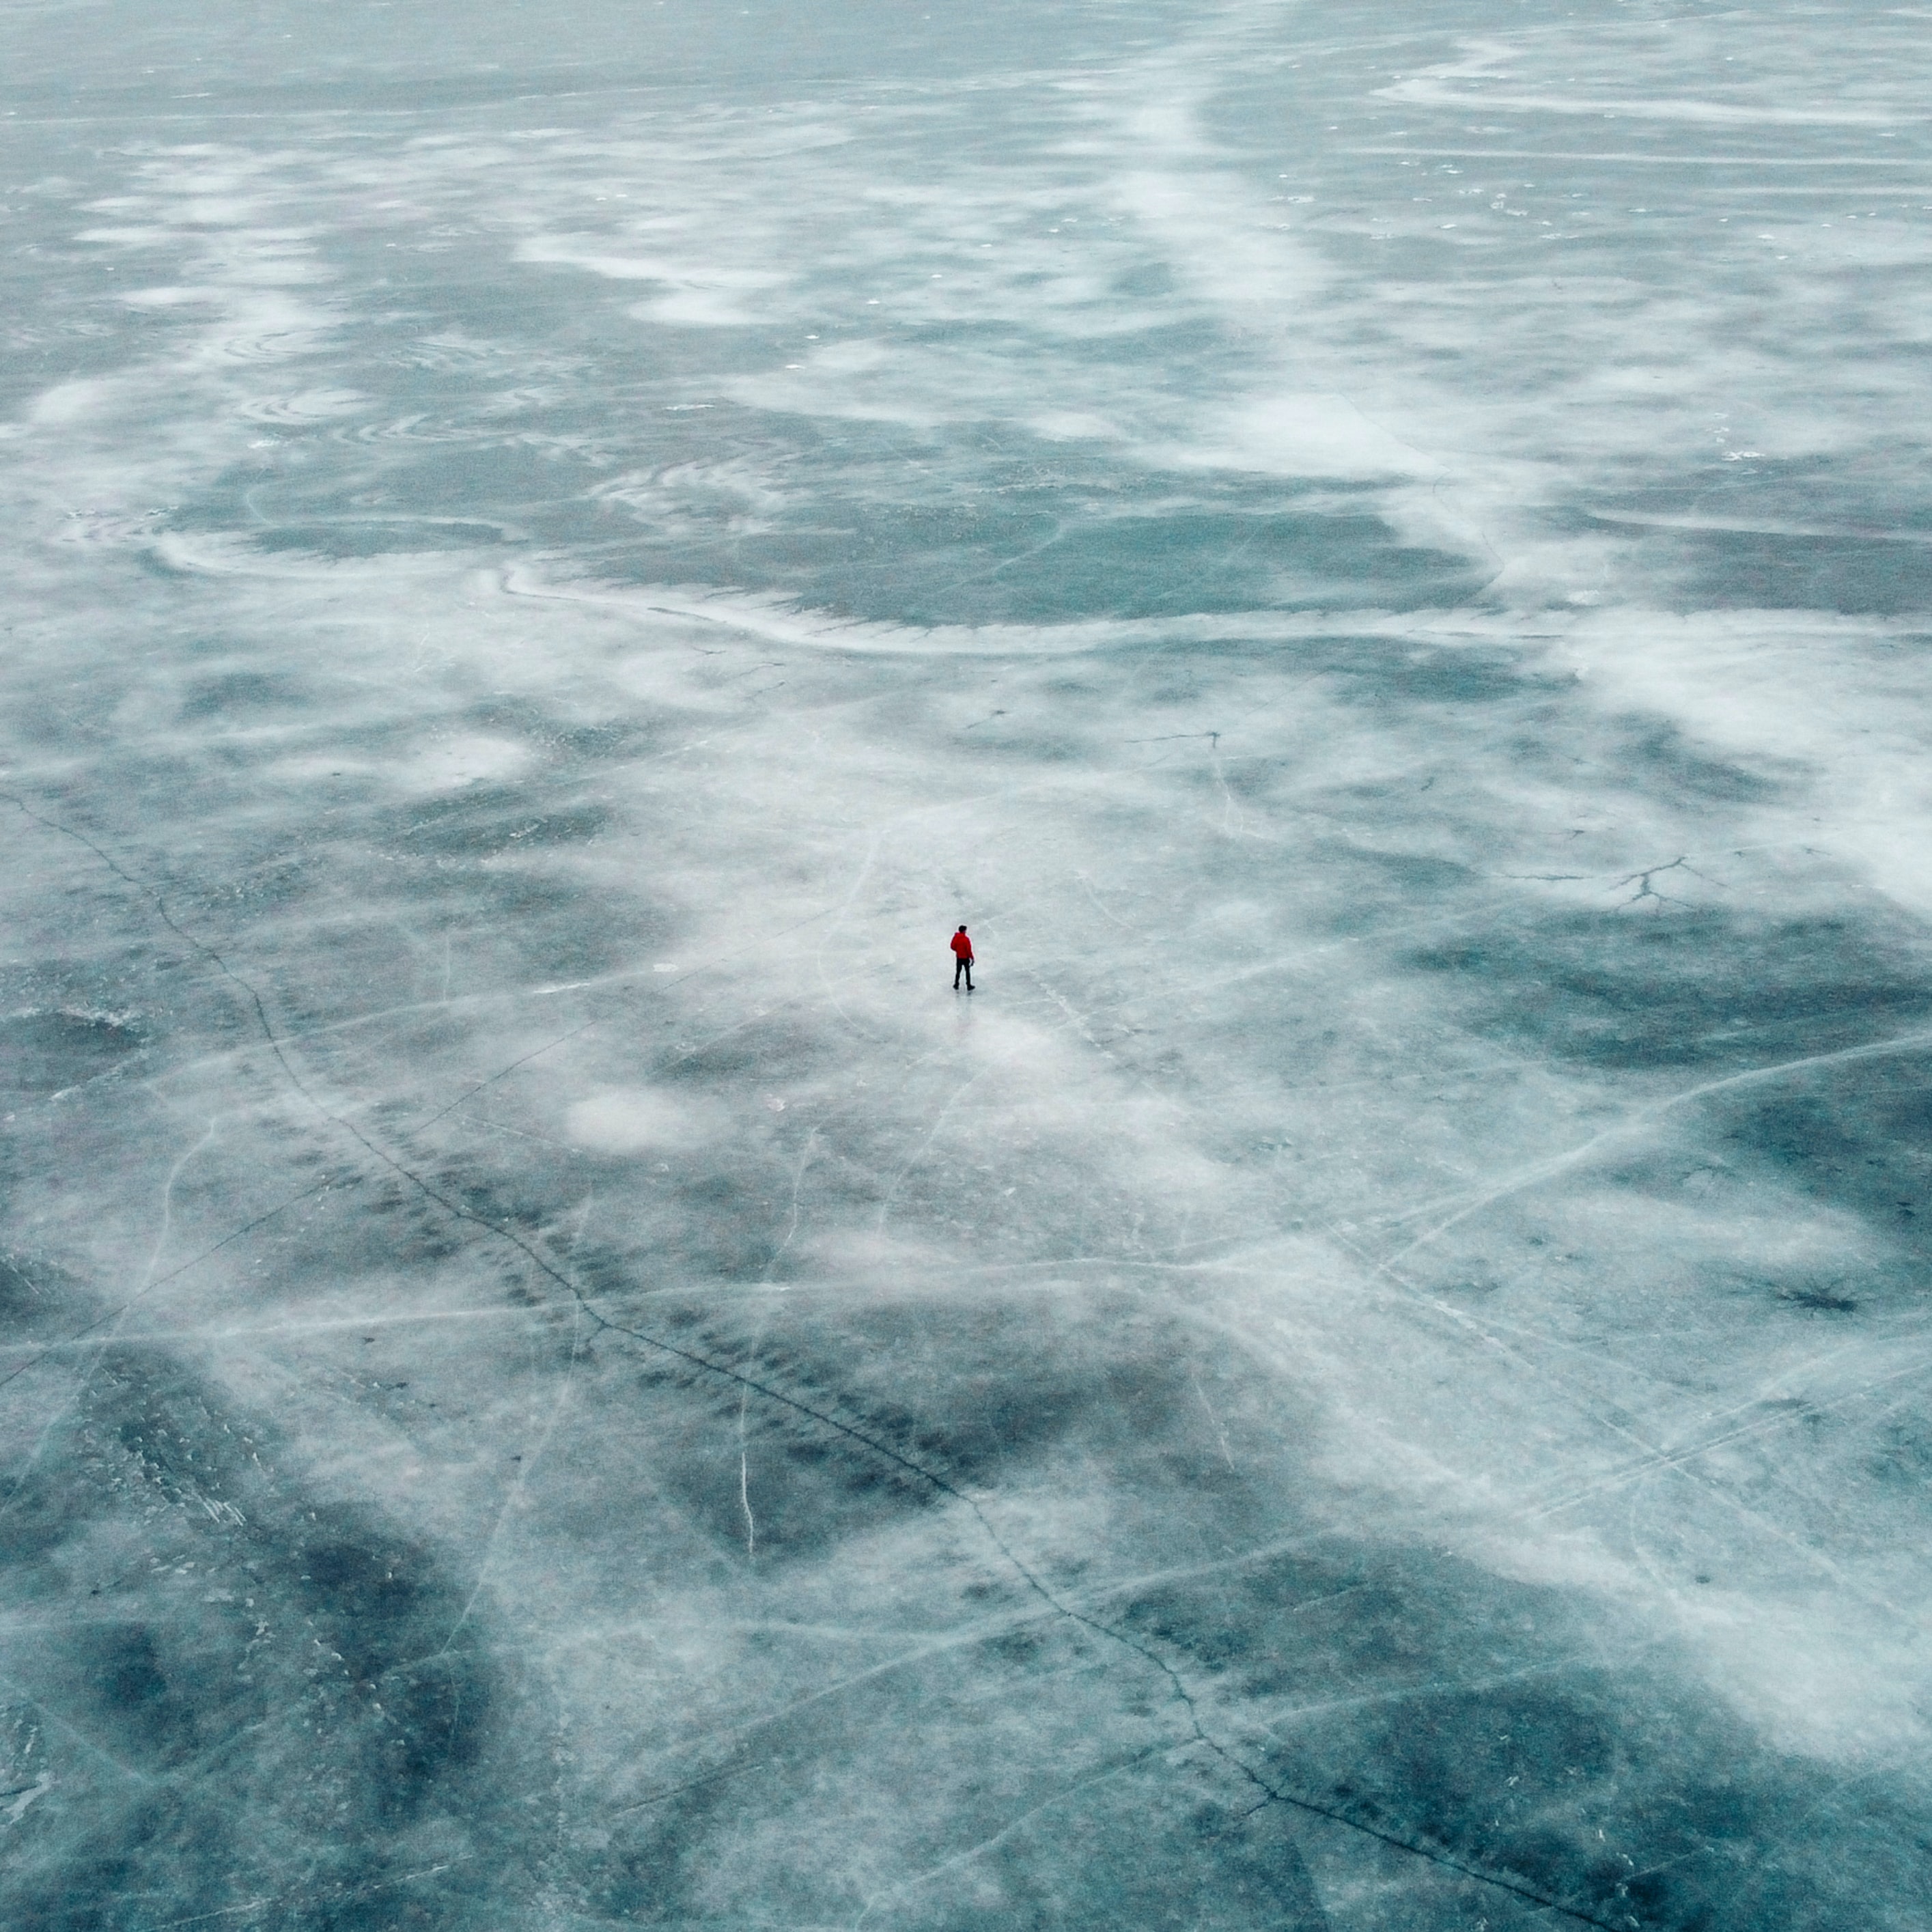 4K, FHD, UHD miscellanea, ice, human, view from above